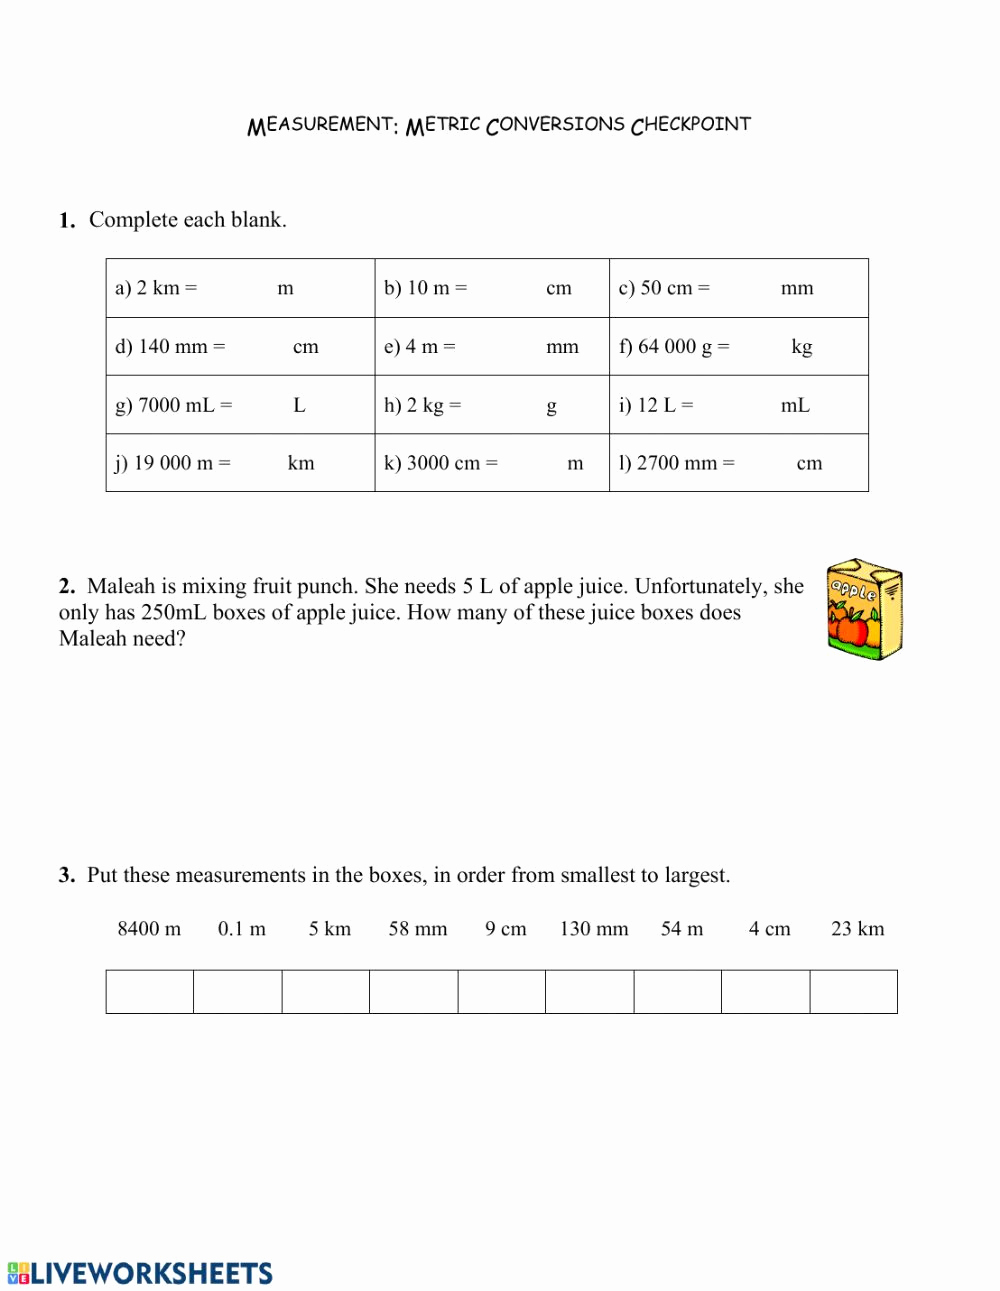 Metric Conversion Worksheets 5th Grade New 20 5th Grade Metric Conversion Worksheets